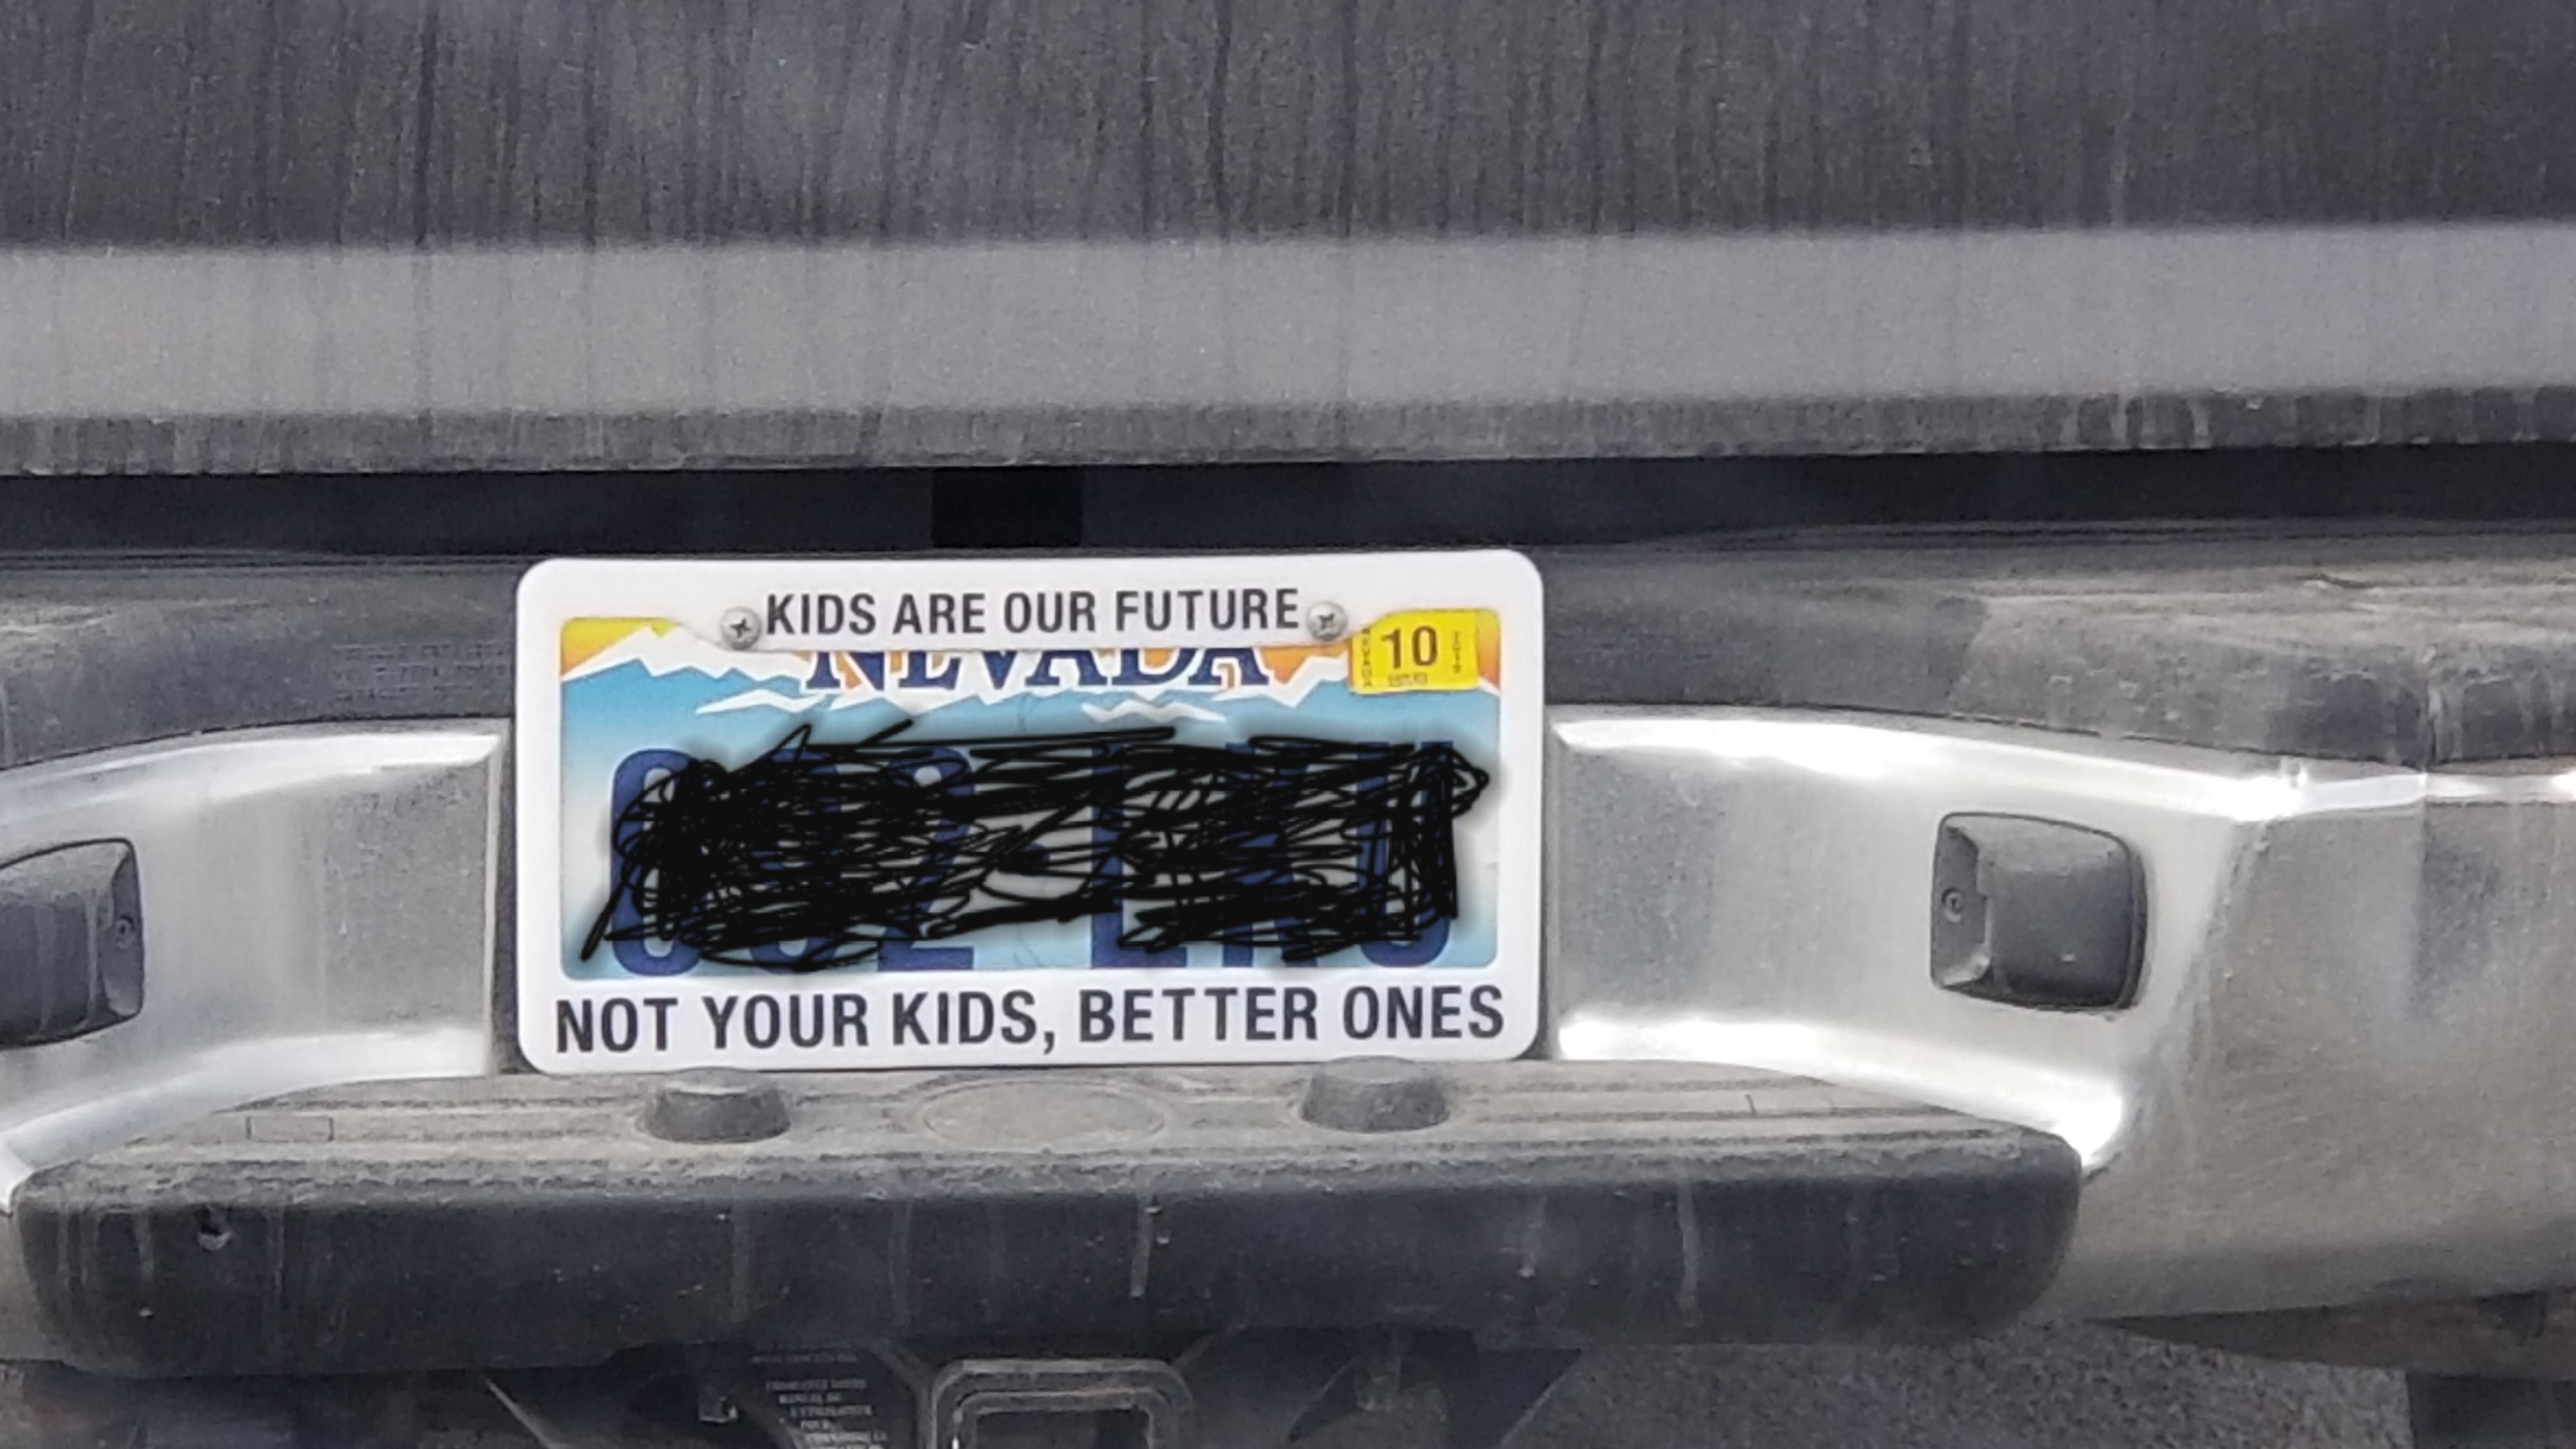 This license plate frame...